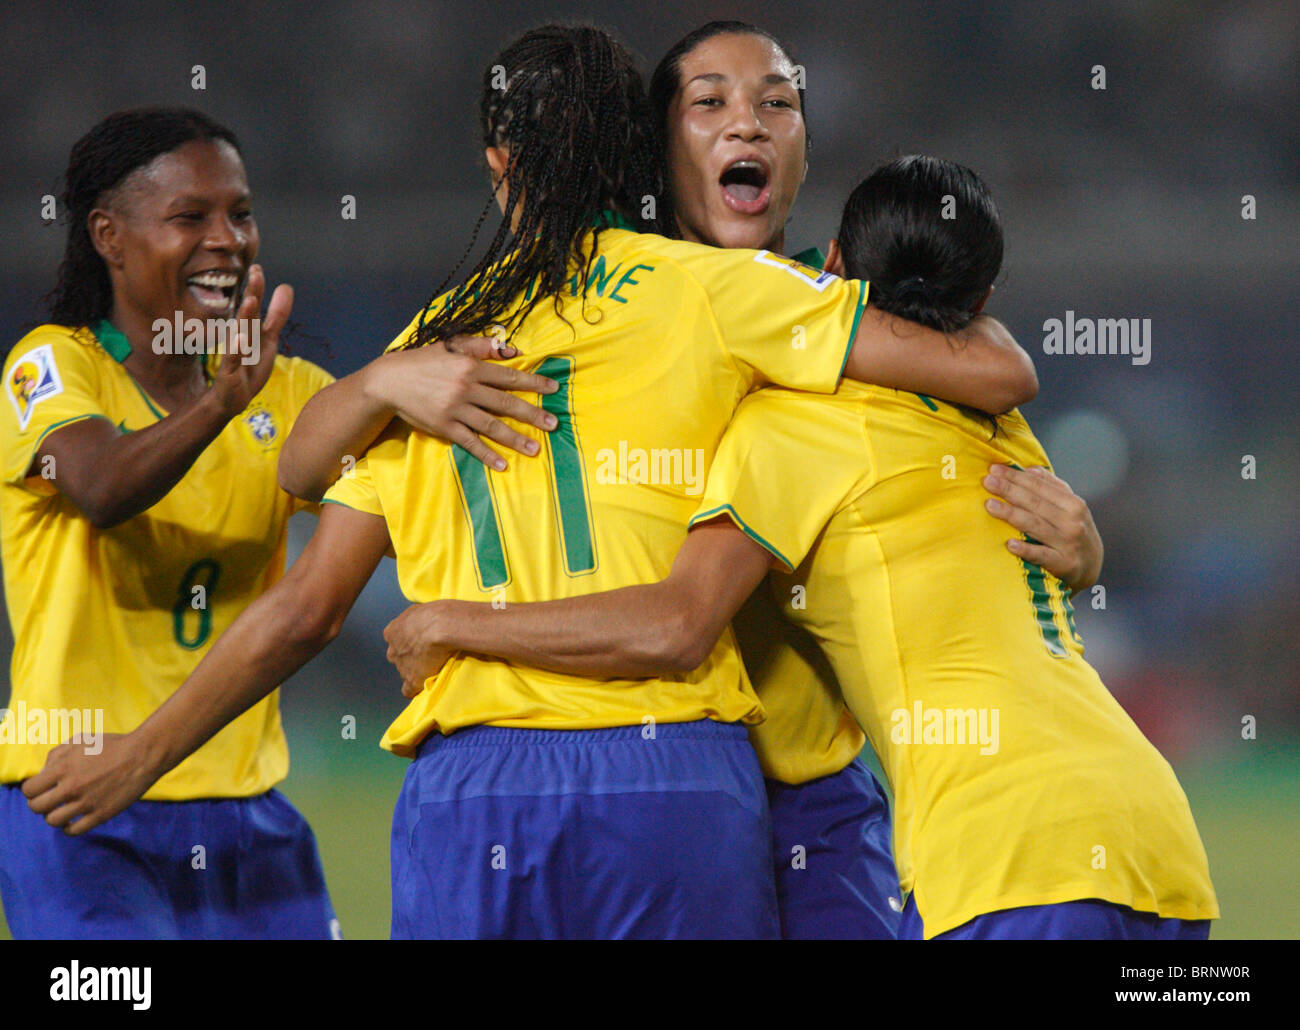 Formiga, Cristiane, Daniela and Marta (l-r) of Brazil celebrate after a goal against China during a 2007 Women's World Cup match Stock Photo